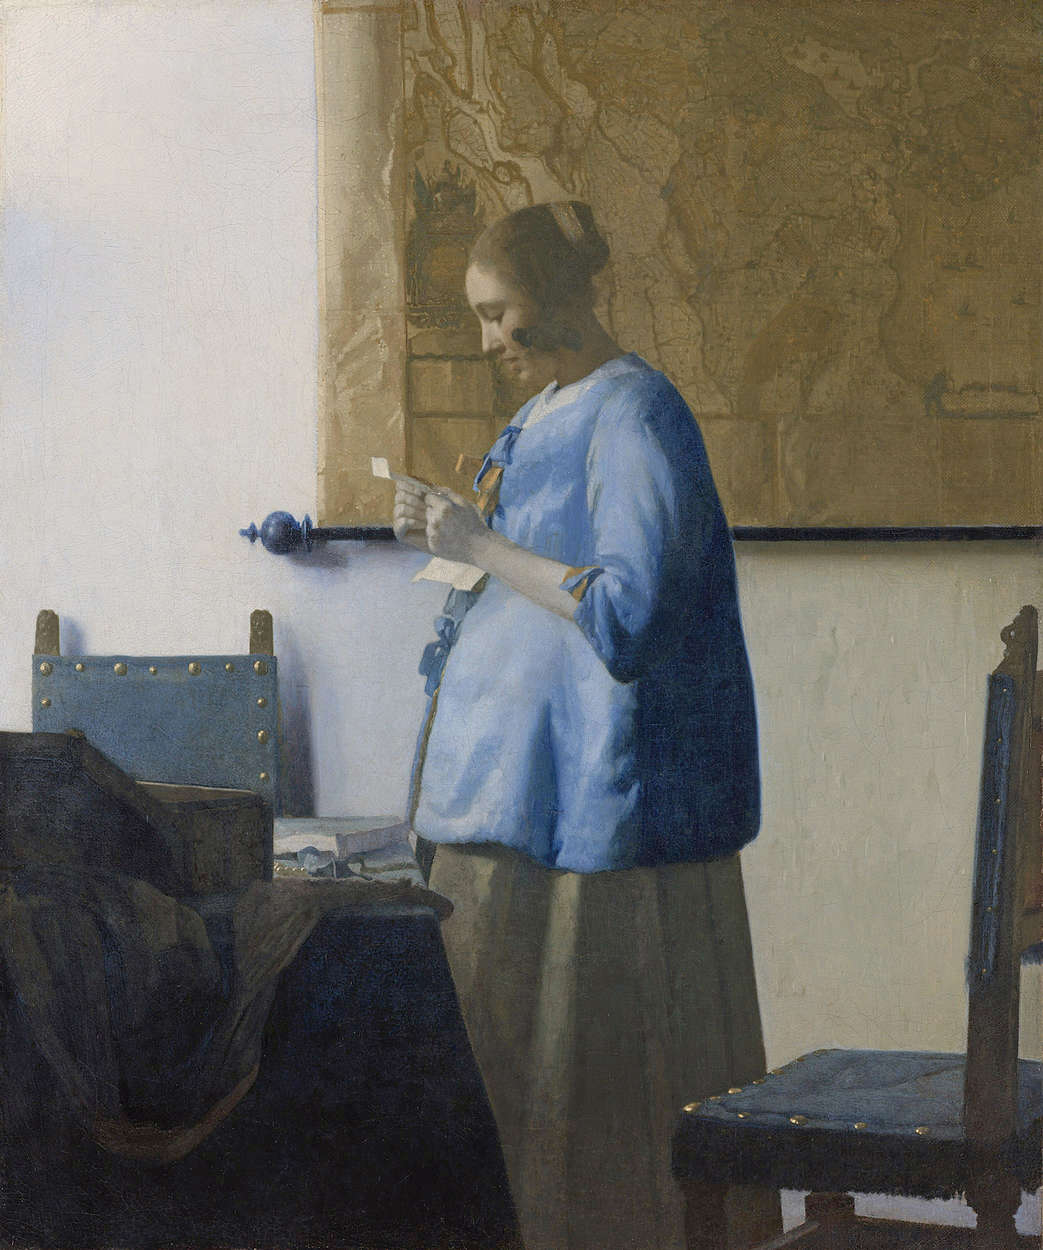             Photo wallpaper "Woman reading a letter" by Jan Vermeer
        